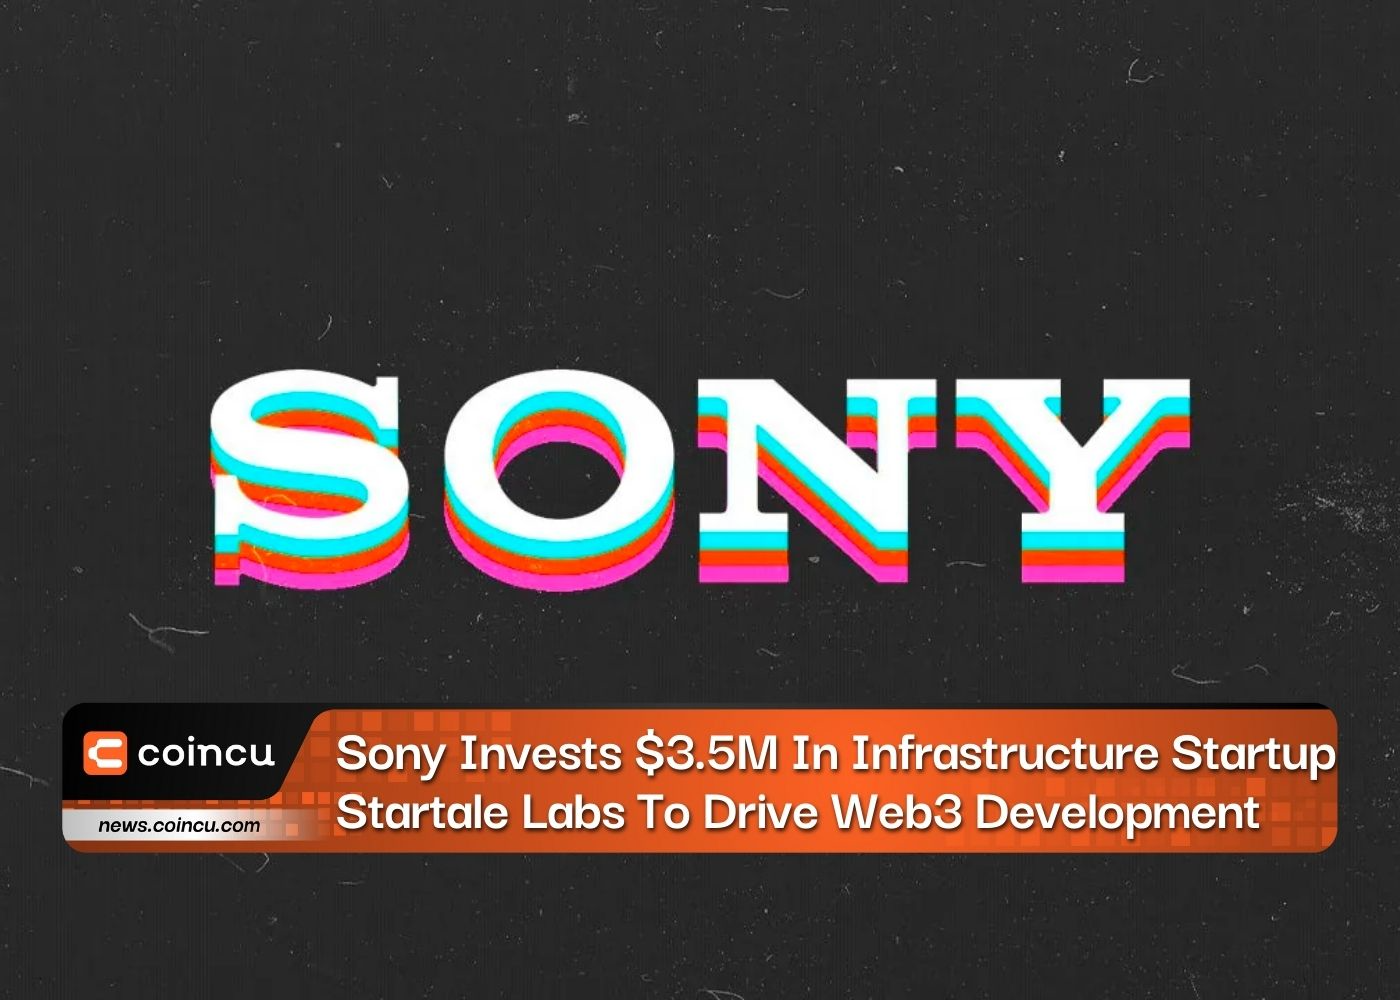 Sony Invests $3.5M In Infrastructure Startup Startale Labs To Drive Web3 Development